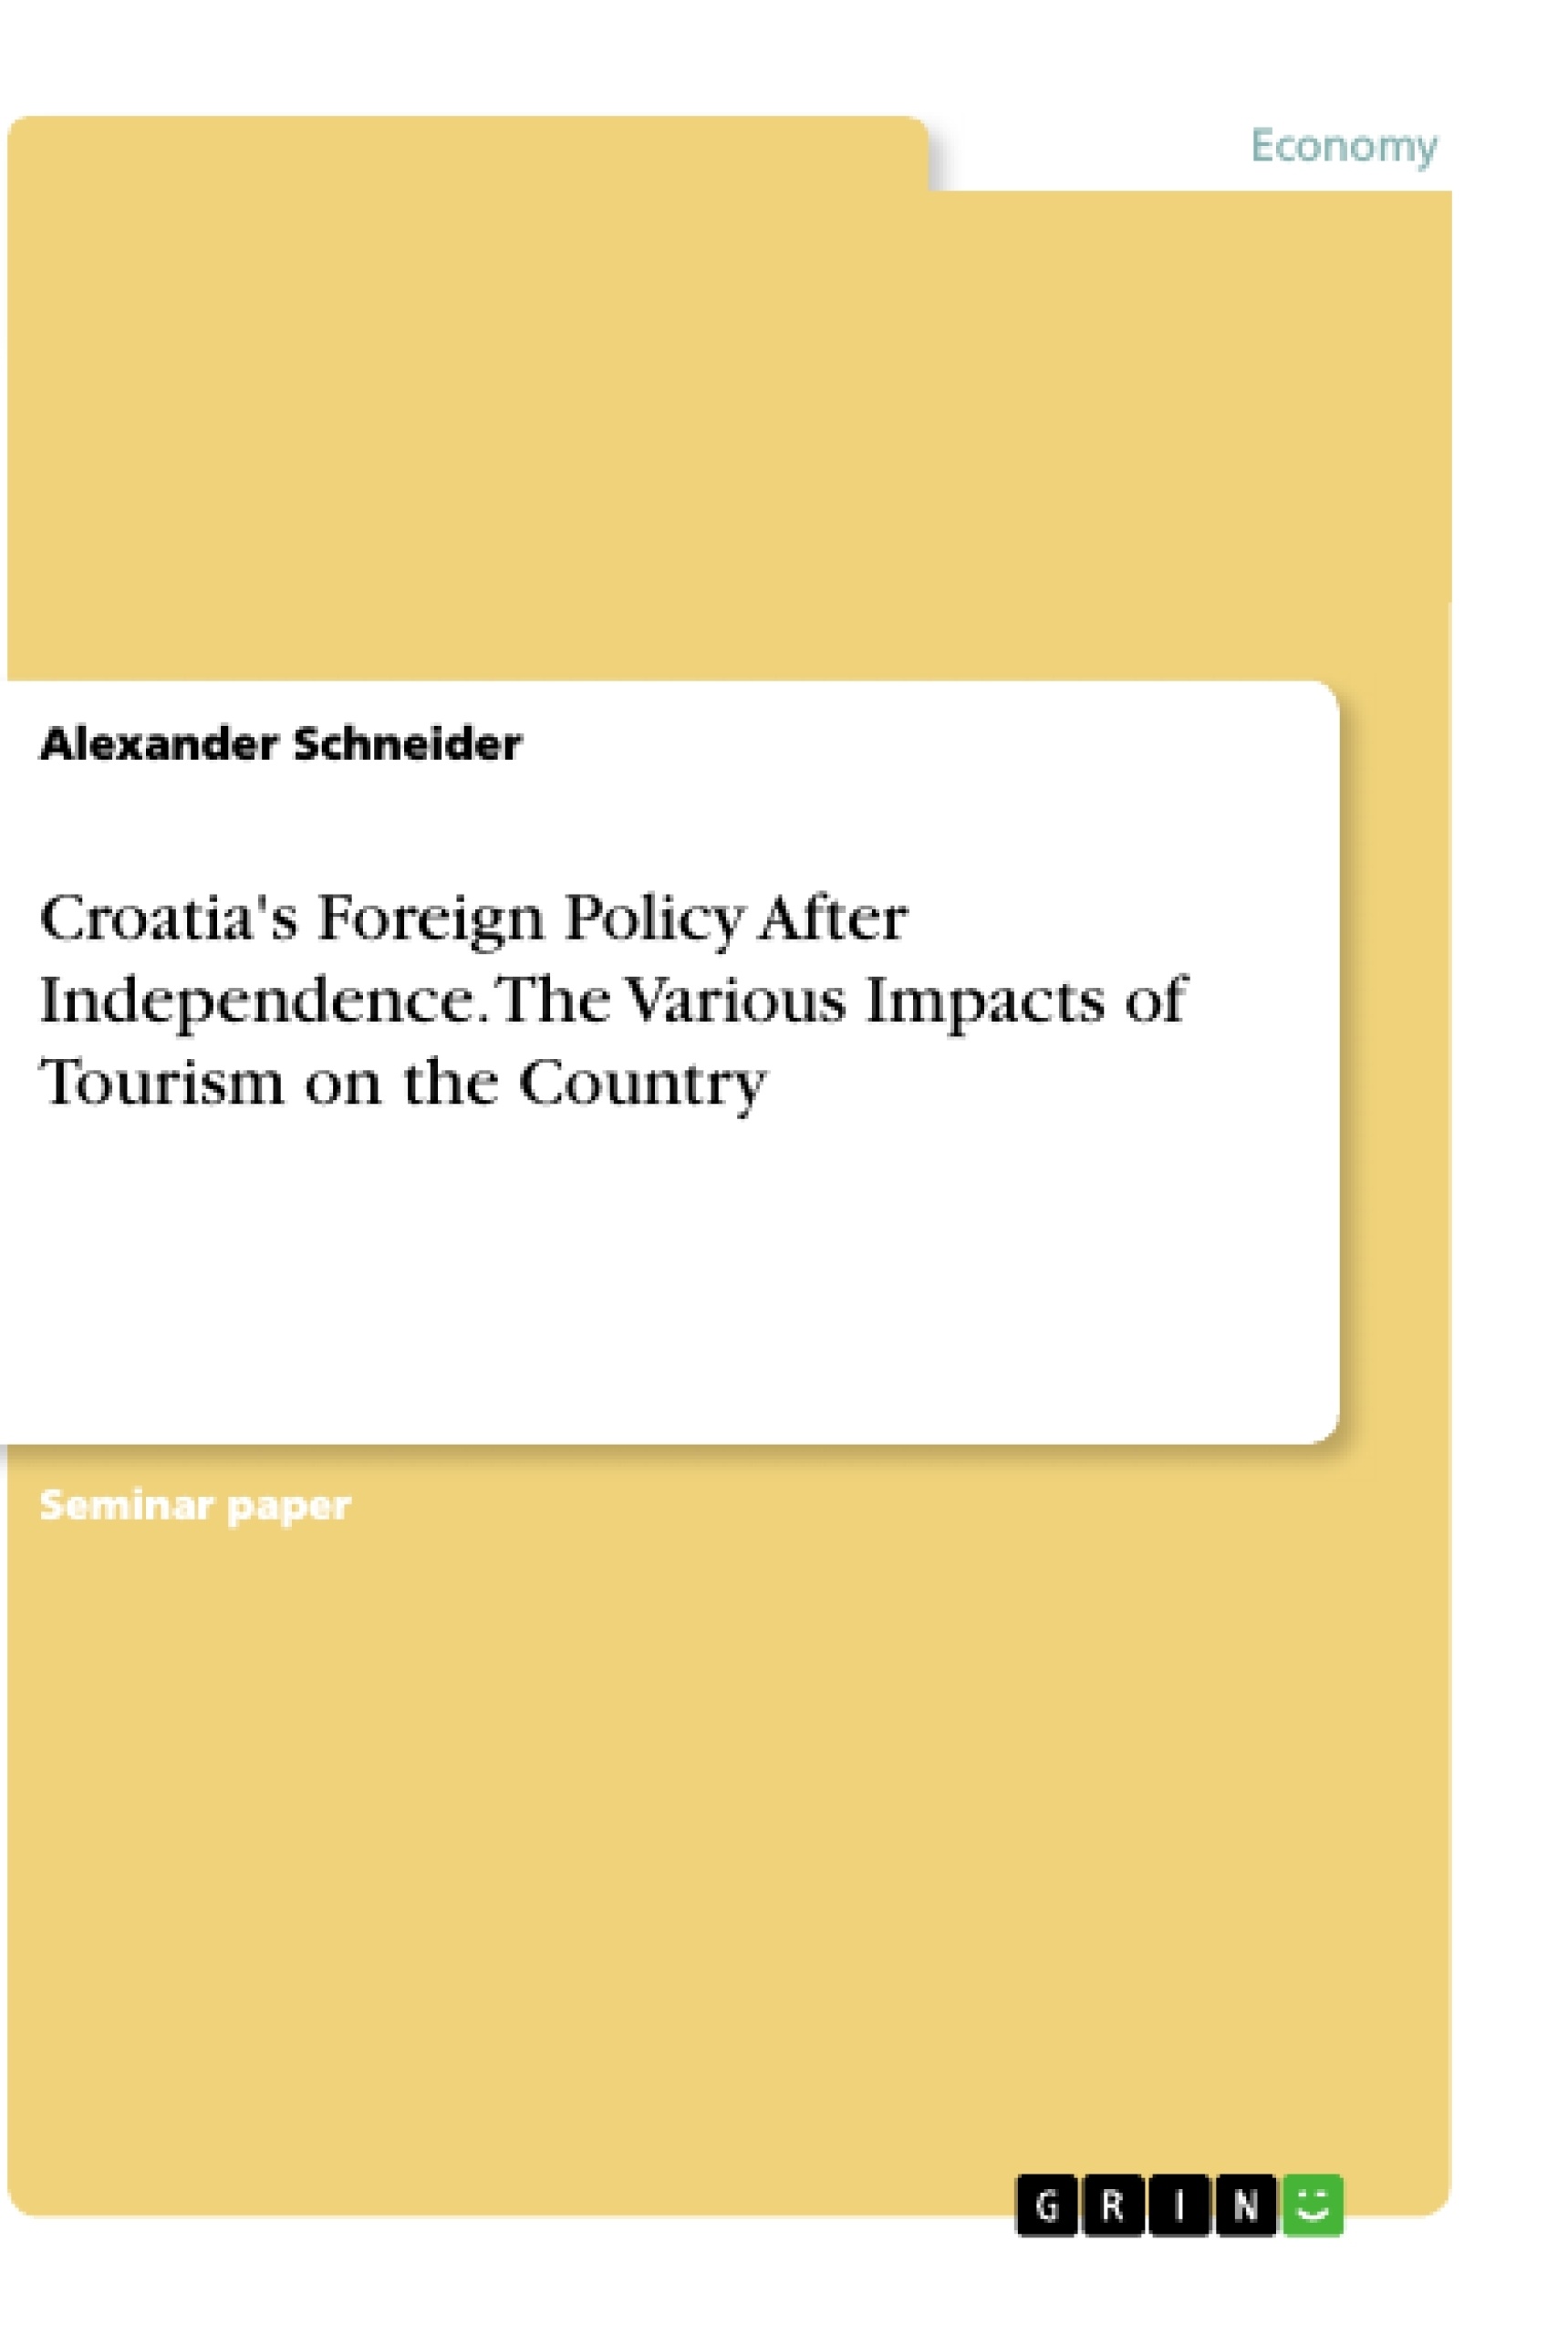 Title: Croatia's Foreign Policy After Independence. The Various Impacts of Tourism on the Country